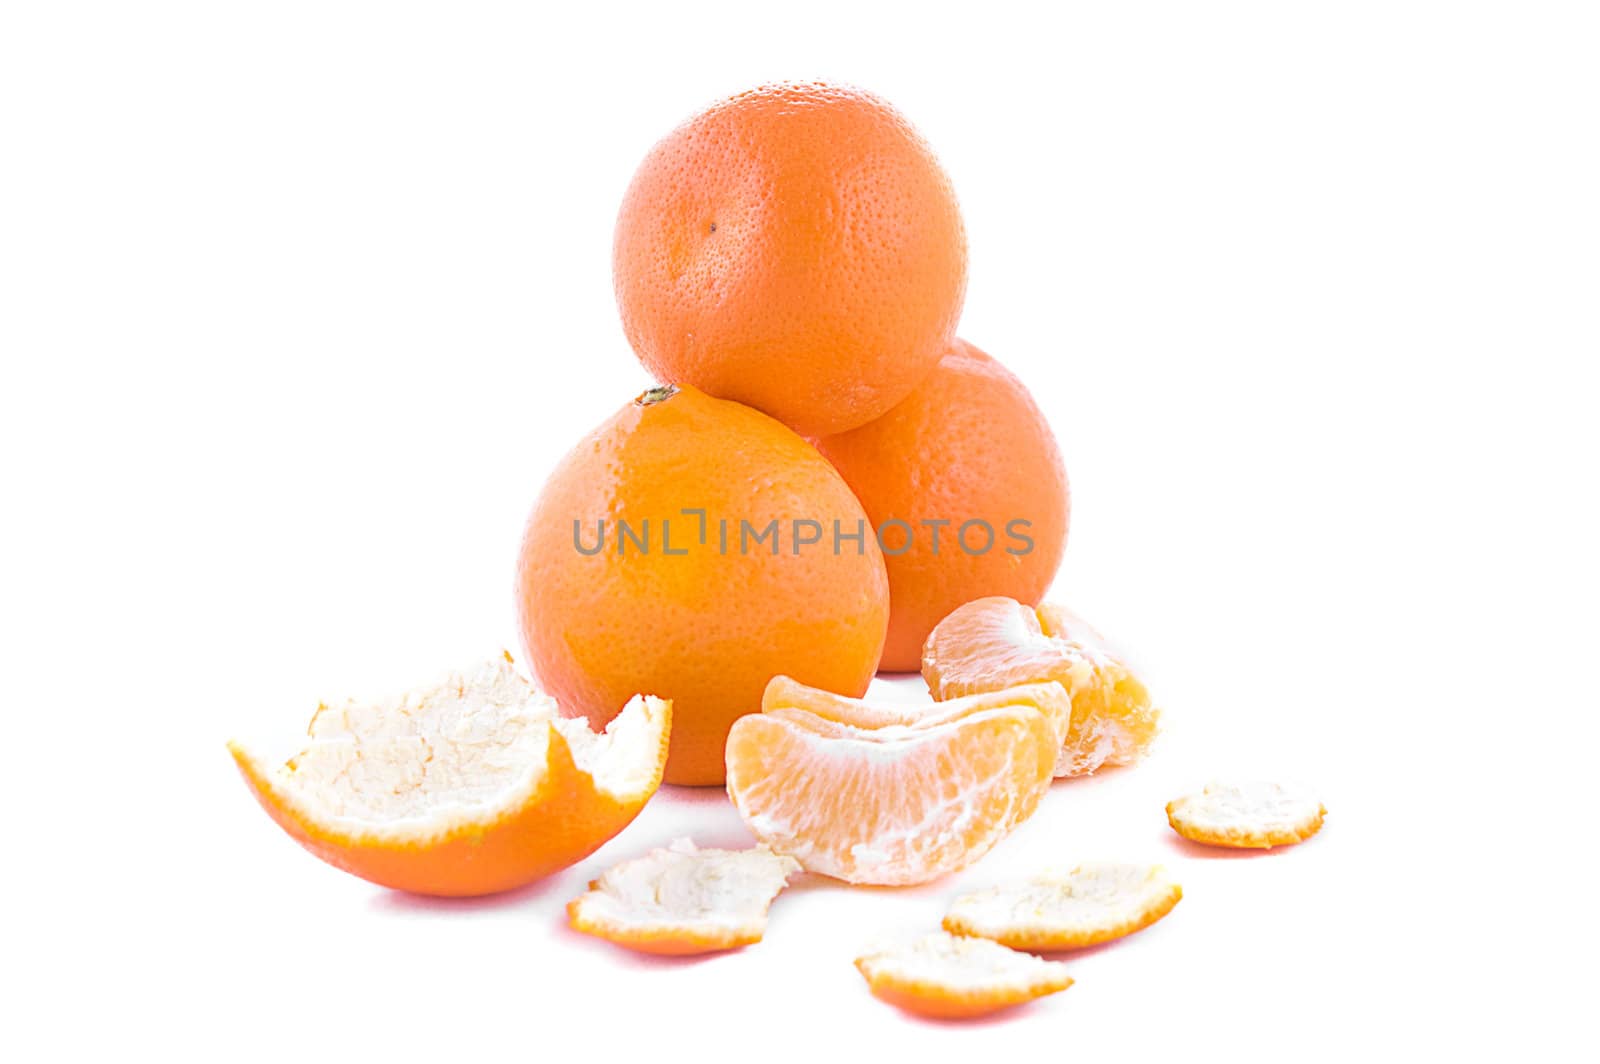 Pile of oranges by Angel_a